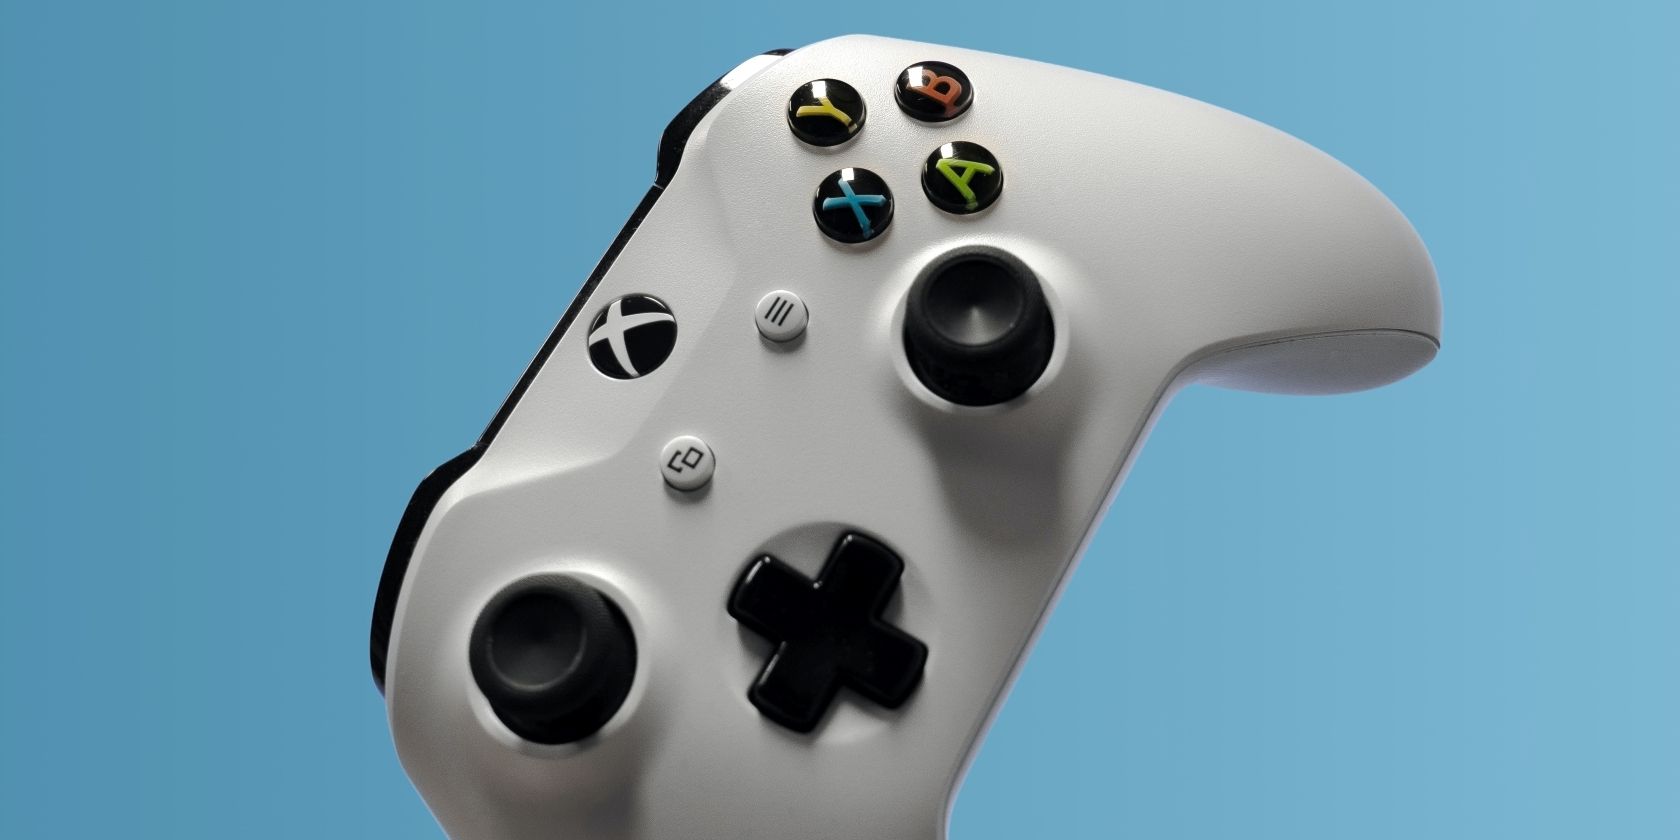 A photograph of a white Xbox One controller against a blue background 